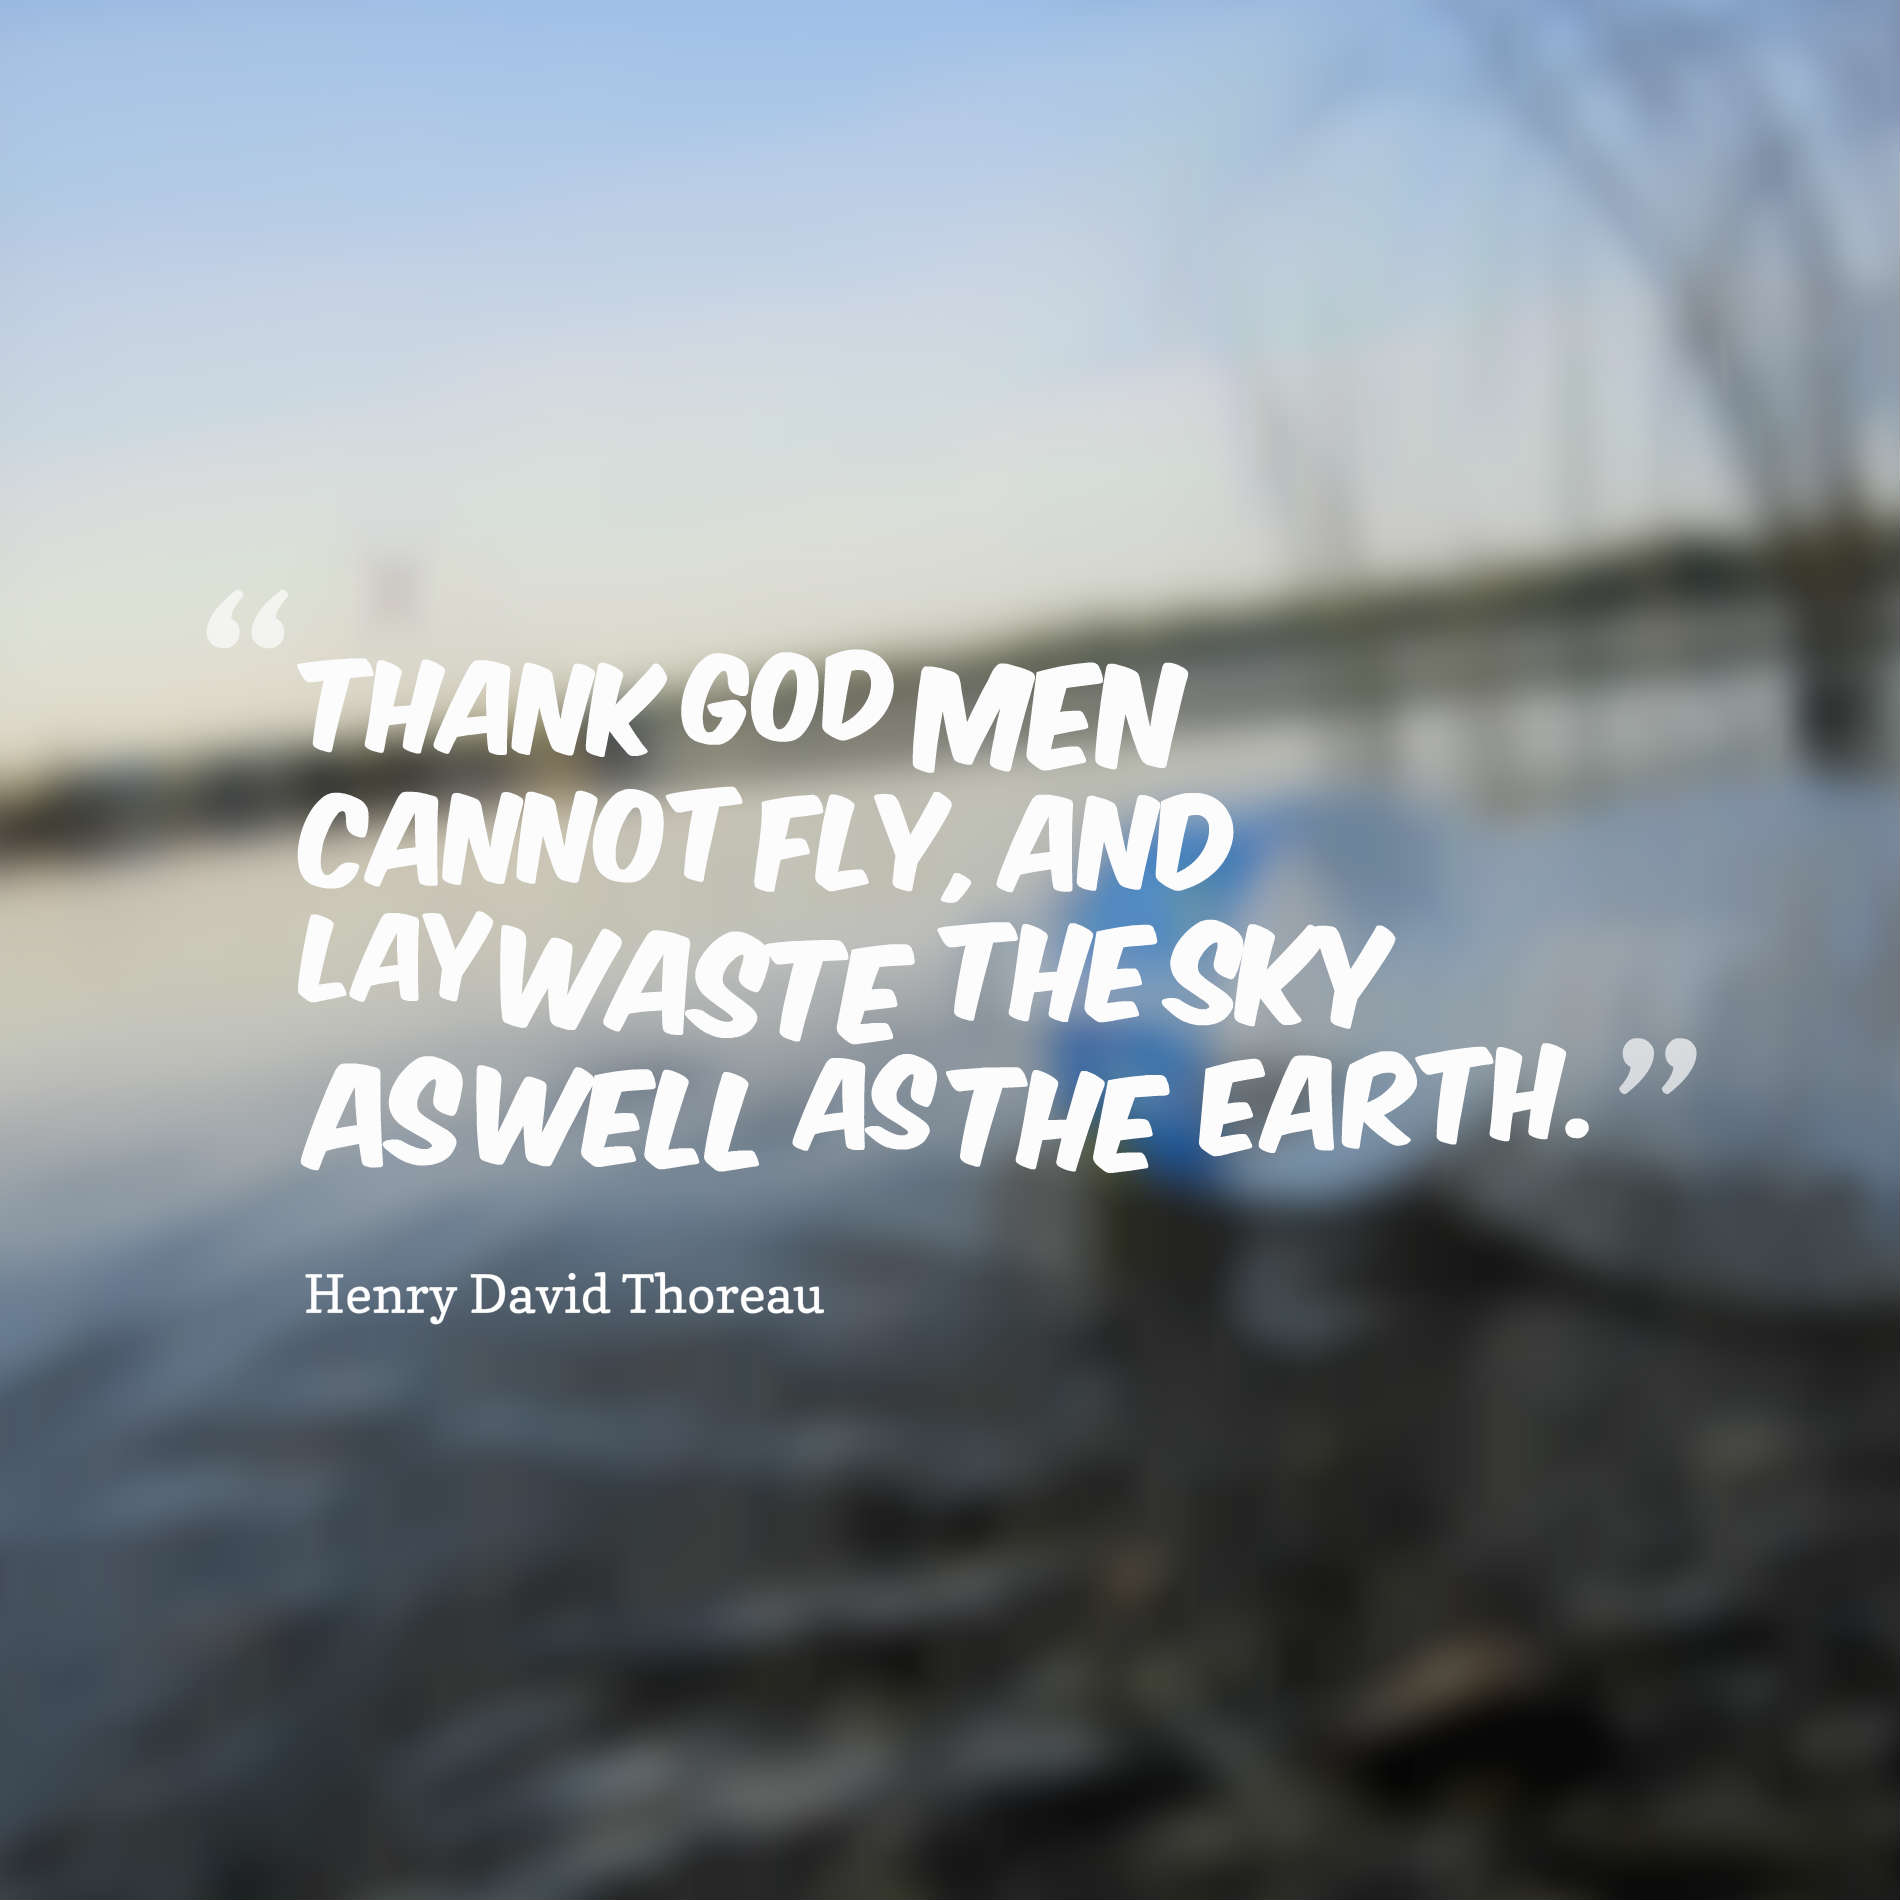 Thank God men cannot fly, and lay waste the sky as well as the earth.